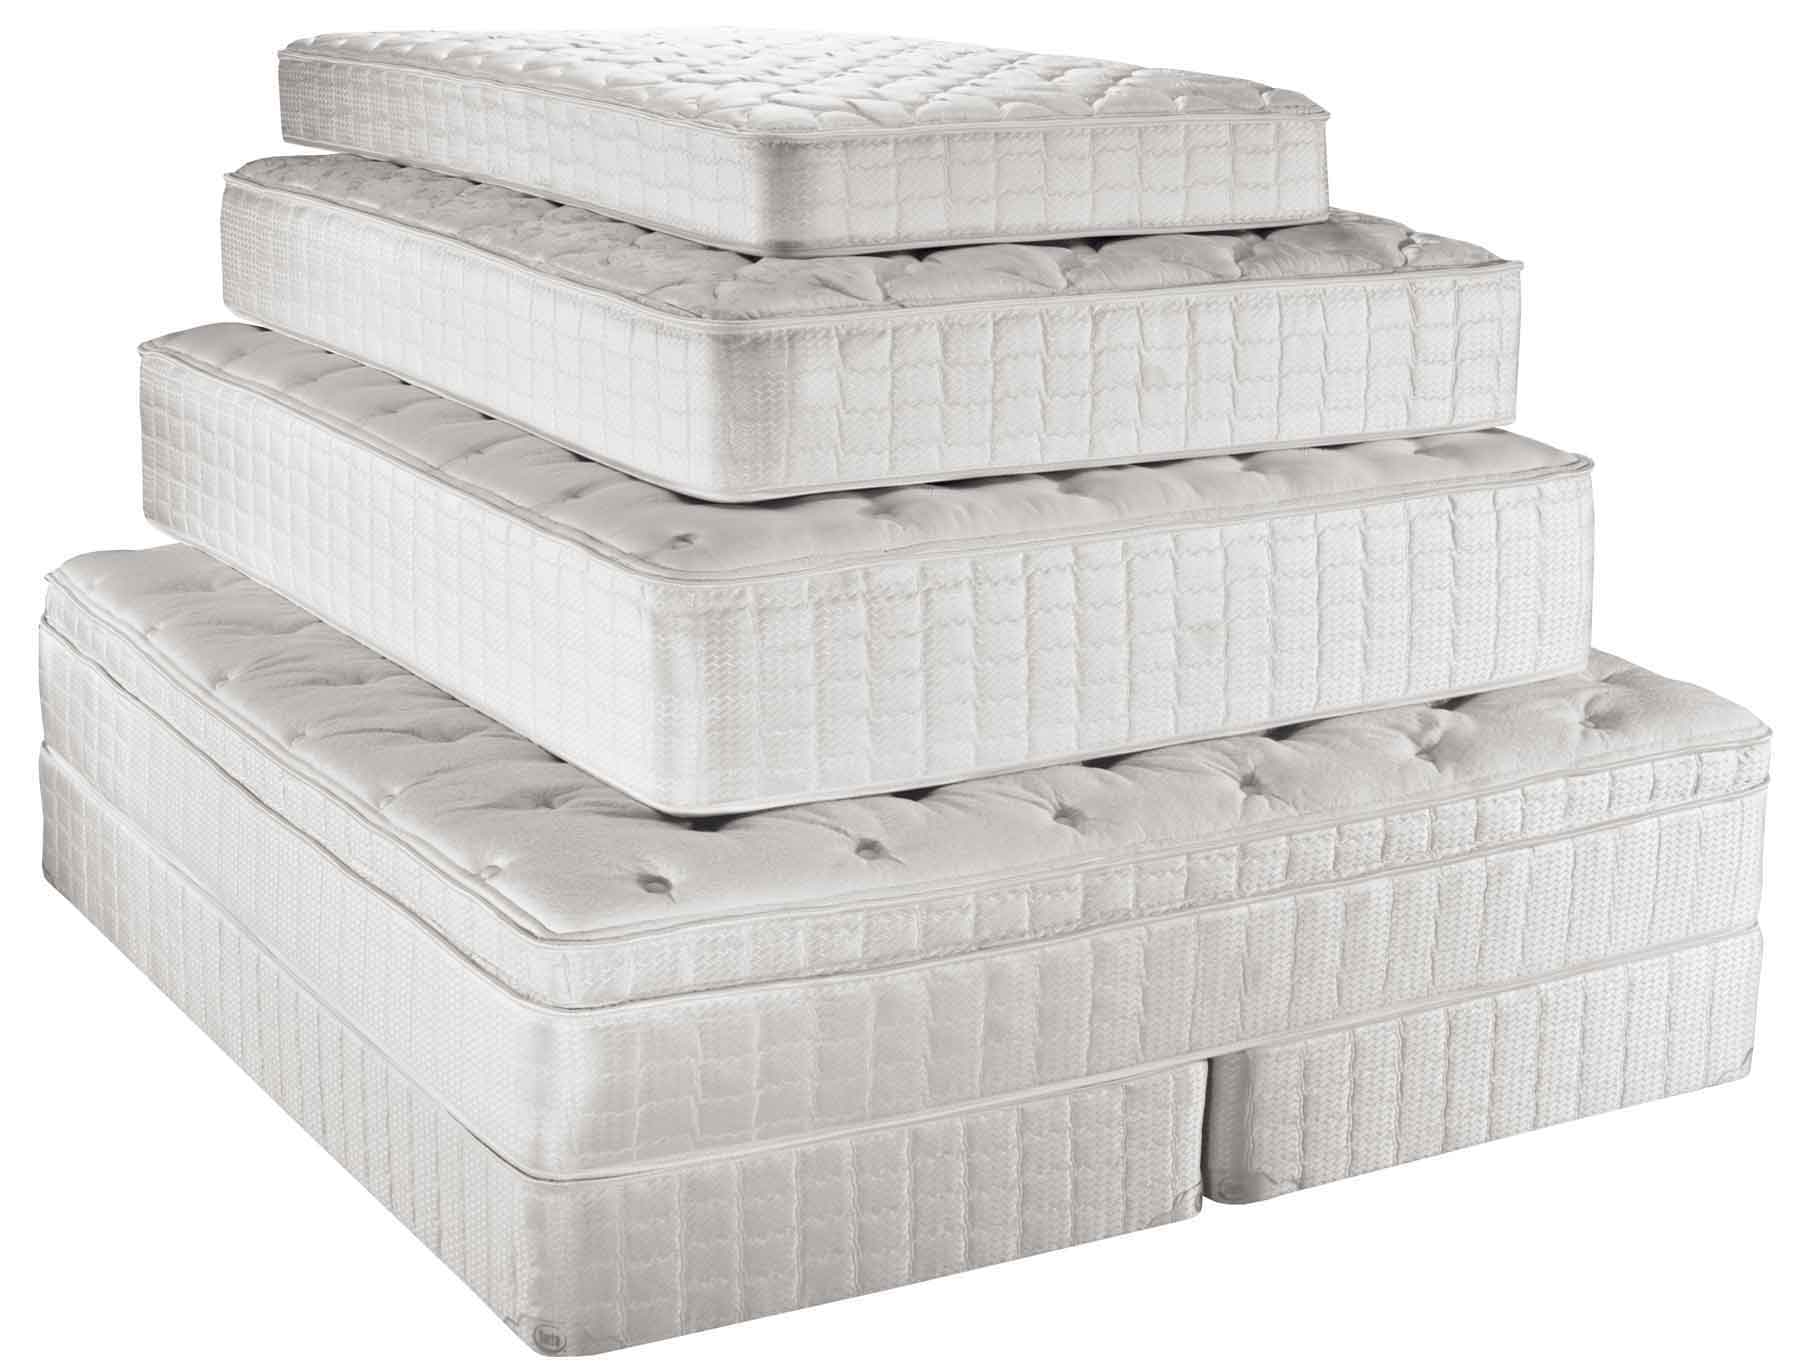 How bedMATCH Could Help You Save On A New Mattress